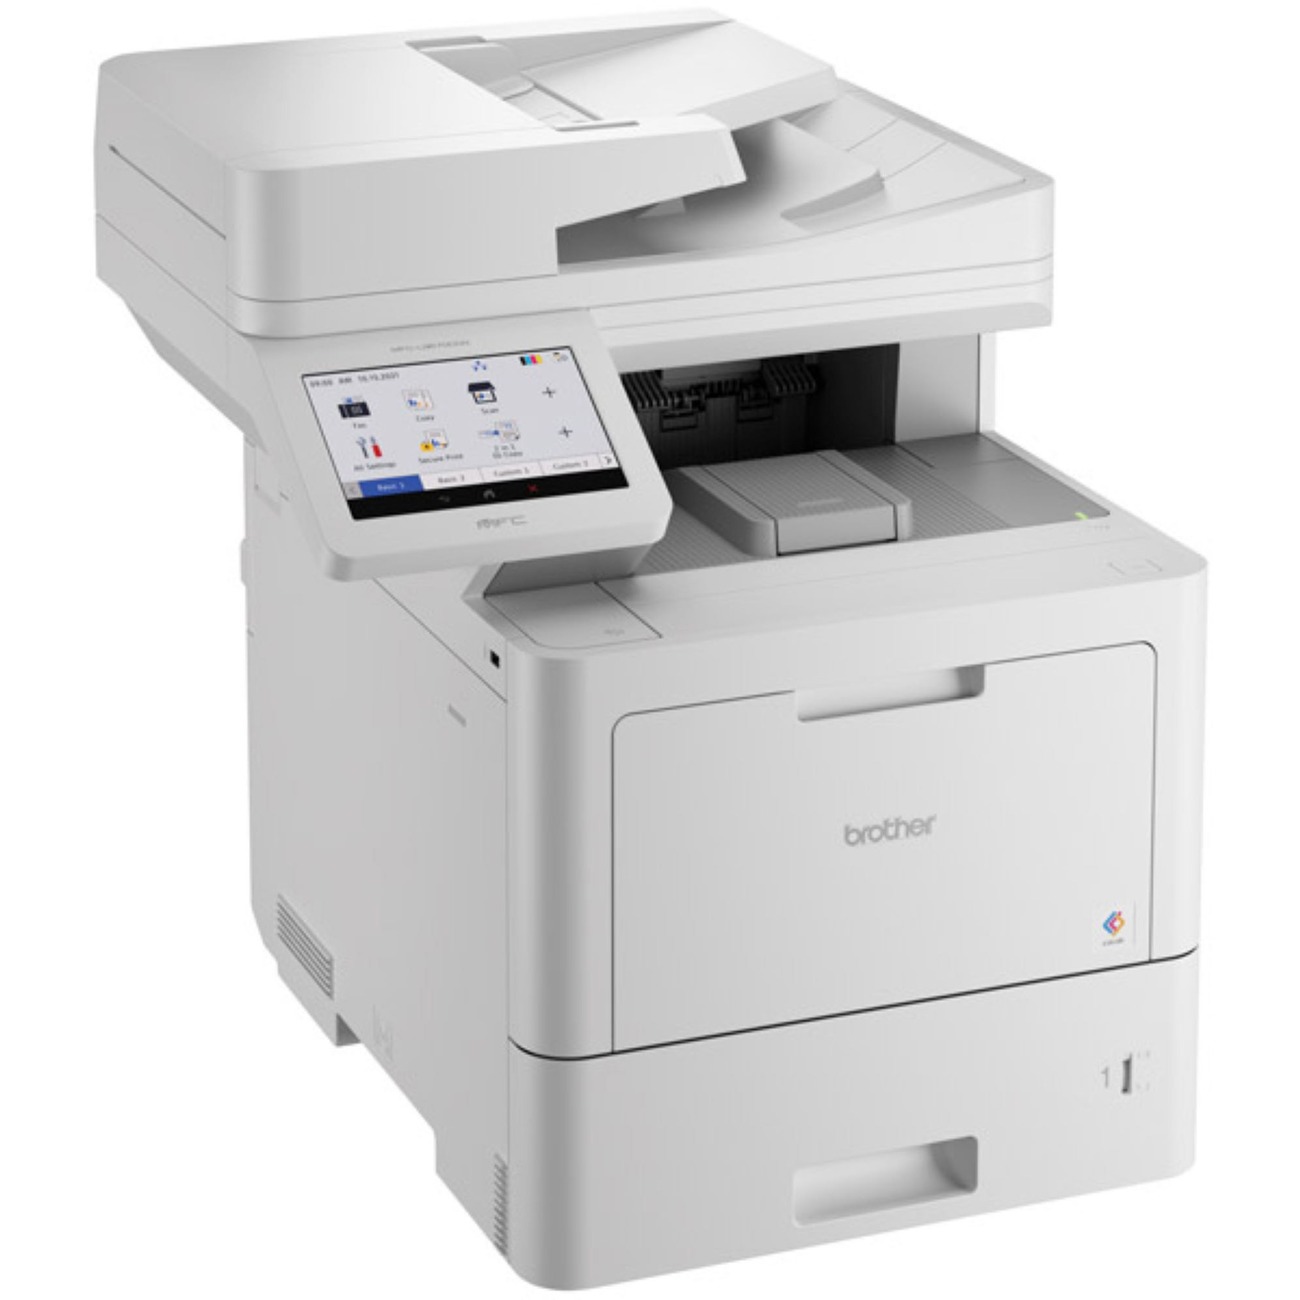 Brother Workhorse MFC-L9670CDN Enterprise Color Laser All-in-One Printer  with Fast Printing, Large Paper Capacity, and Advanced Security Features -  Copier/Fax/Printer/Scanner - 42 ppm Mono/42 ppm Color Print - 2400 x 600 dpi